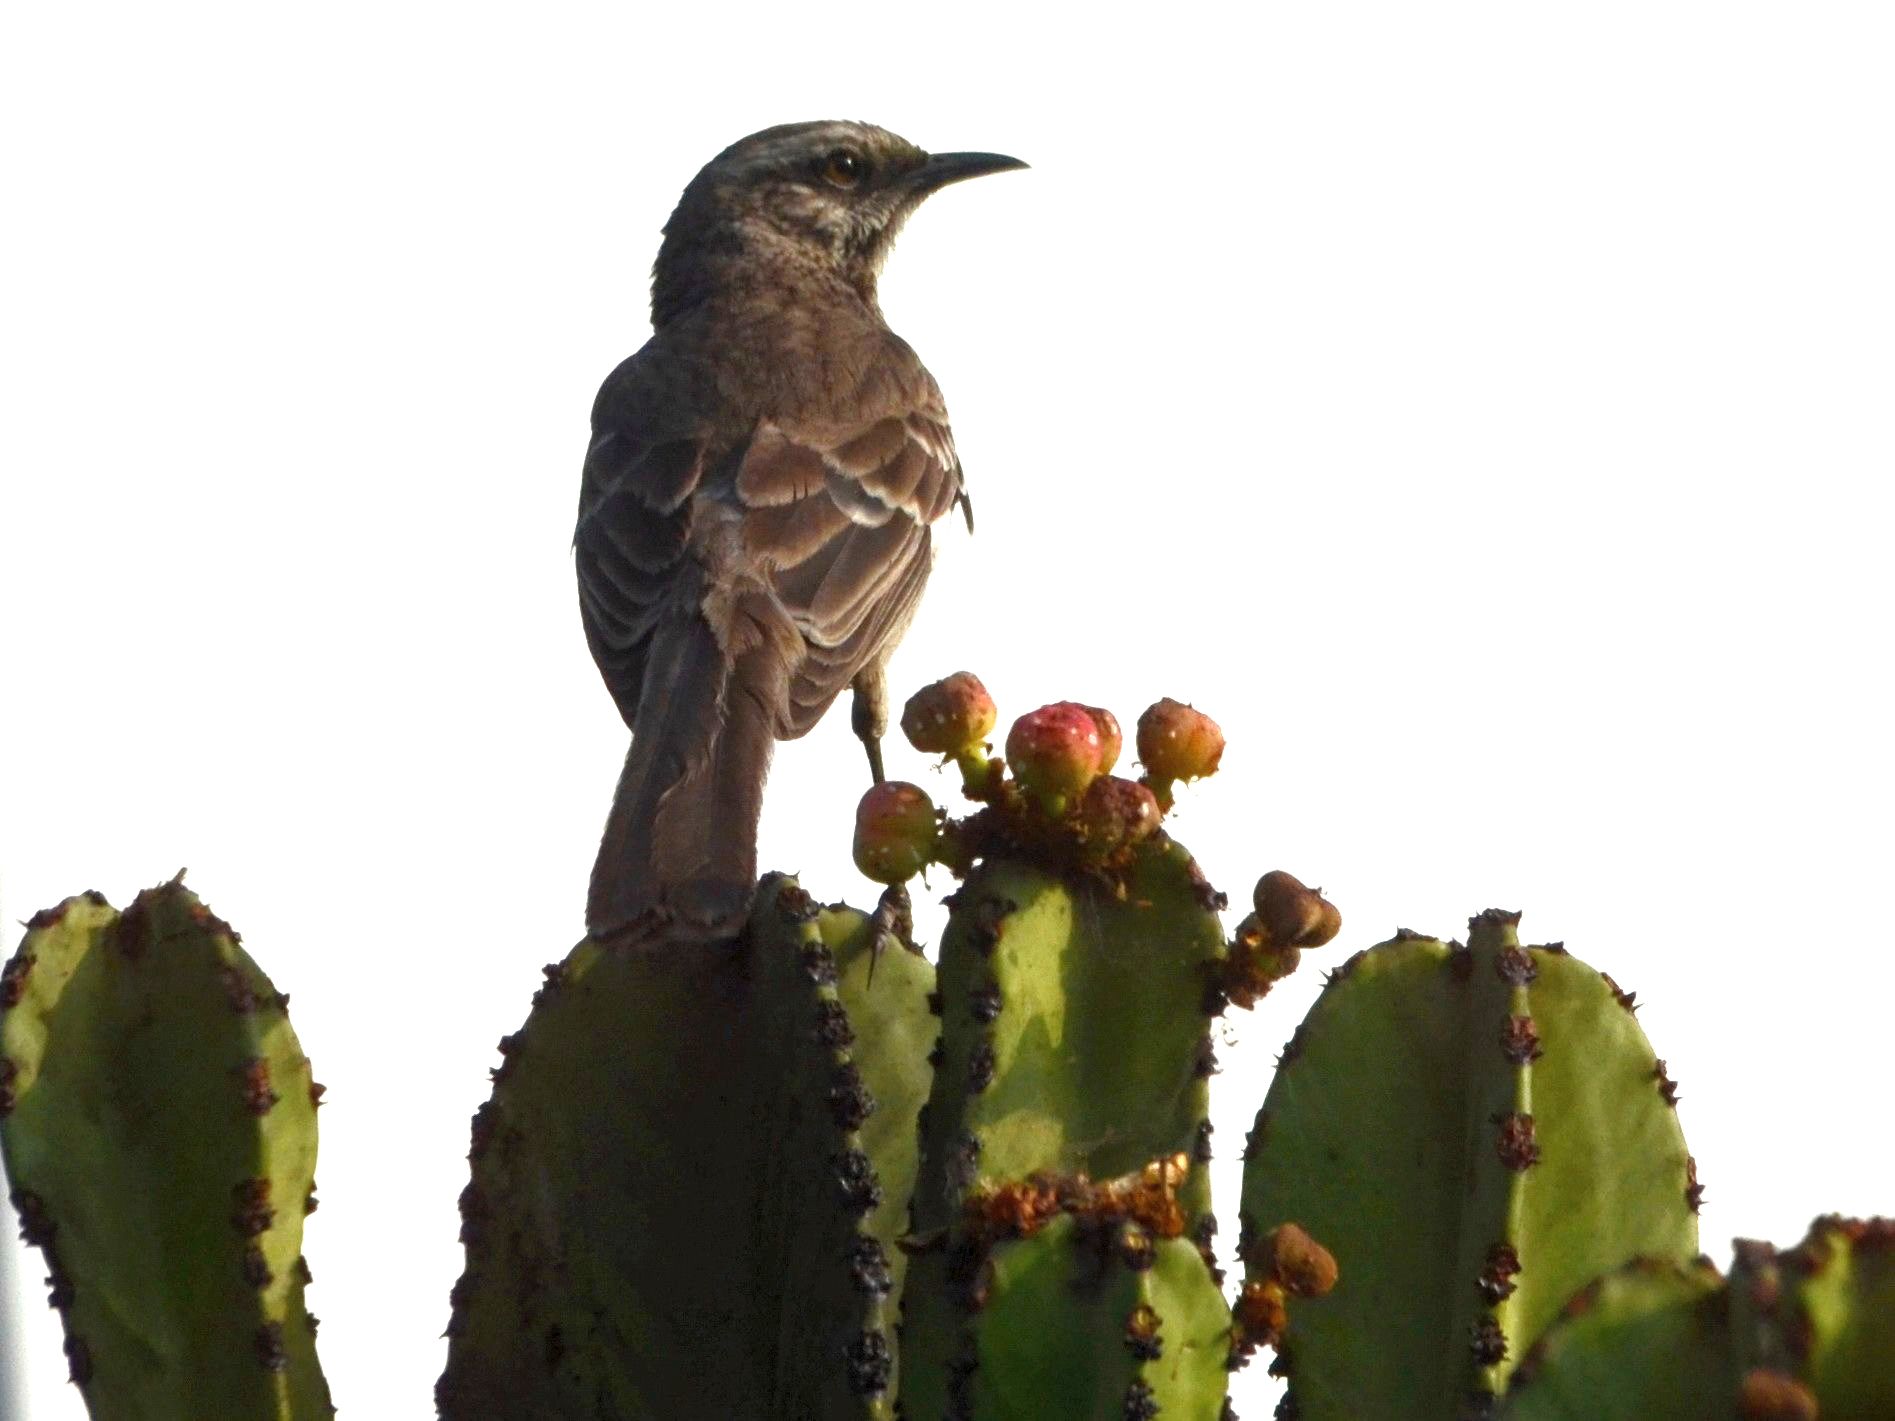 Click picture to see more Long-tailed Mockingbirds.